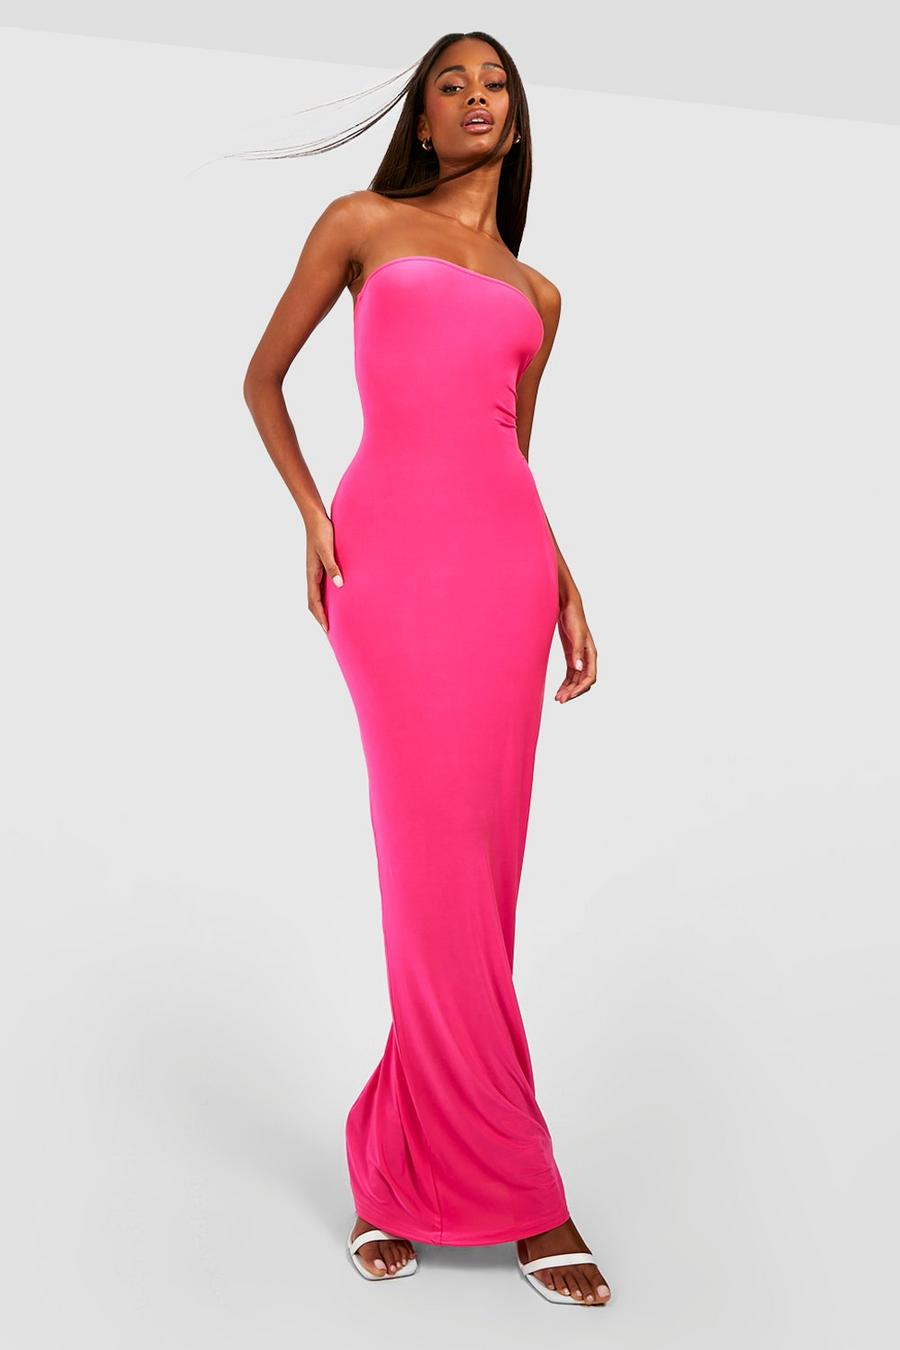 Sky brand maxi dress XS pink high low jewels high-low strapless formal  casual